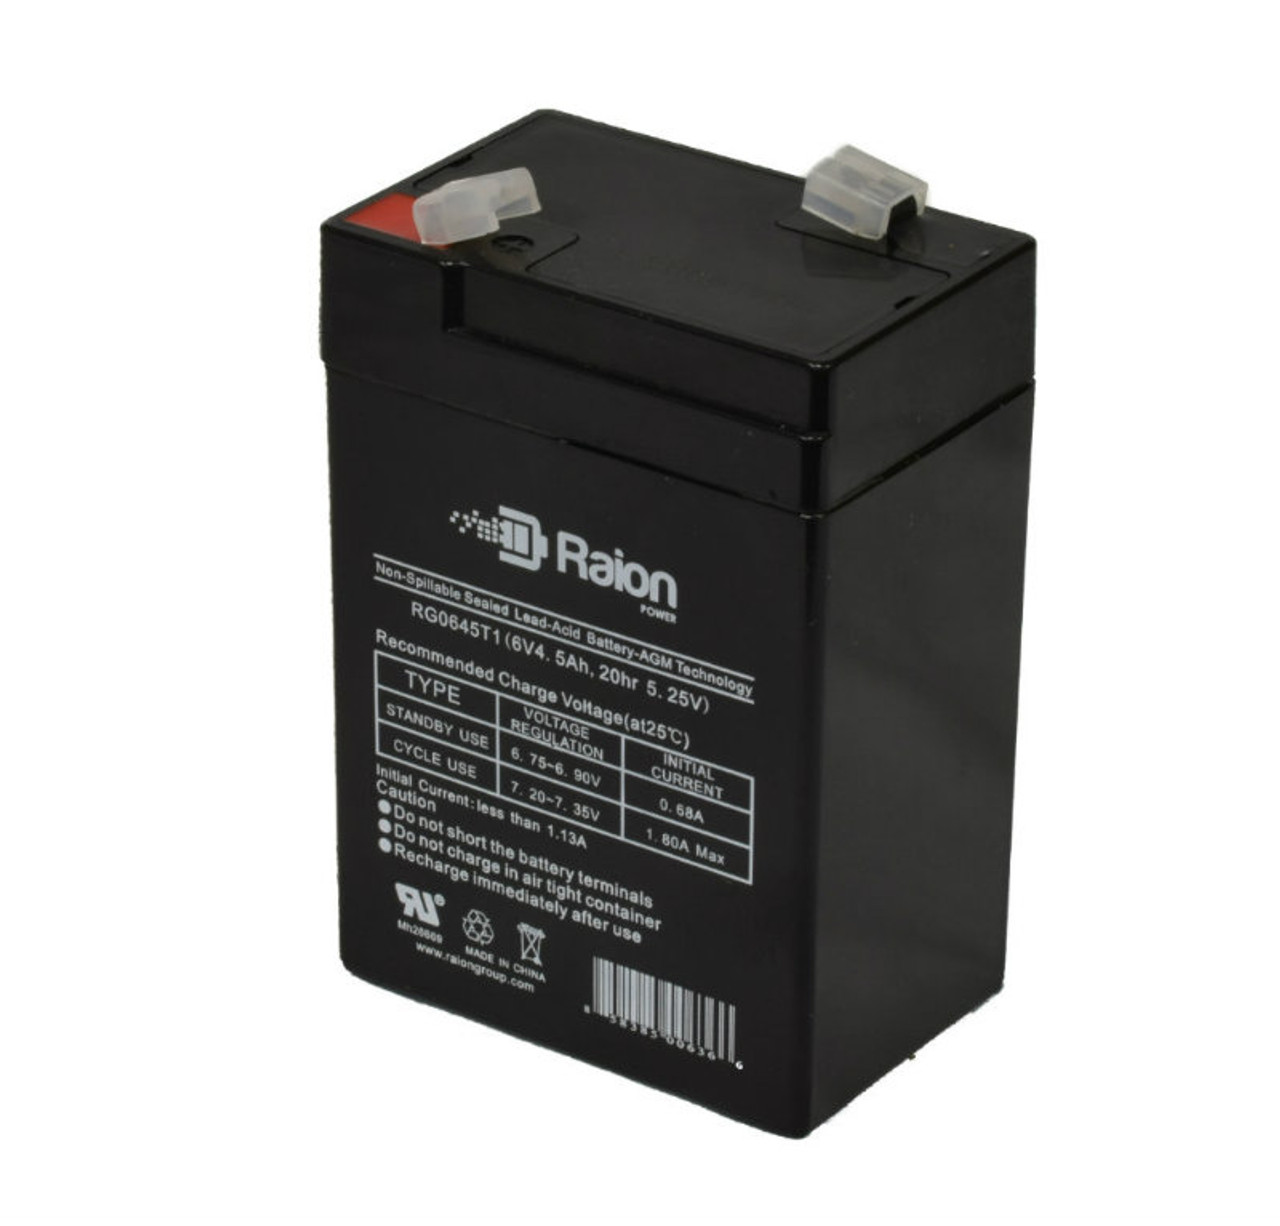 Raion Power RG0645T1 6V 4.5Ah Replacement Battery Cartridge for Kid Trax KT1122TR Mickey Mouse Toddler Quad